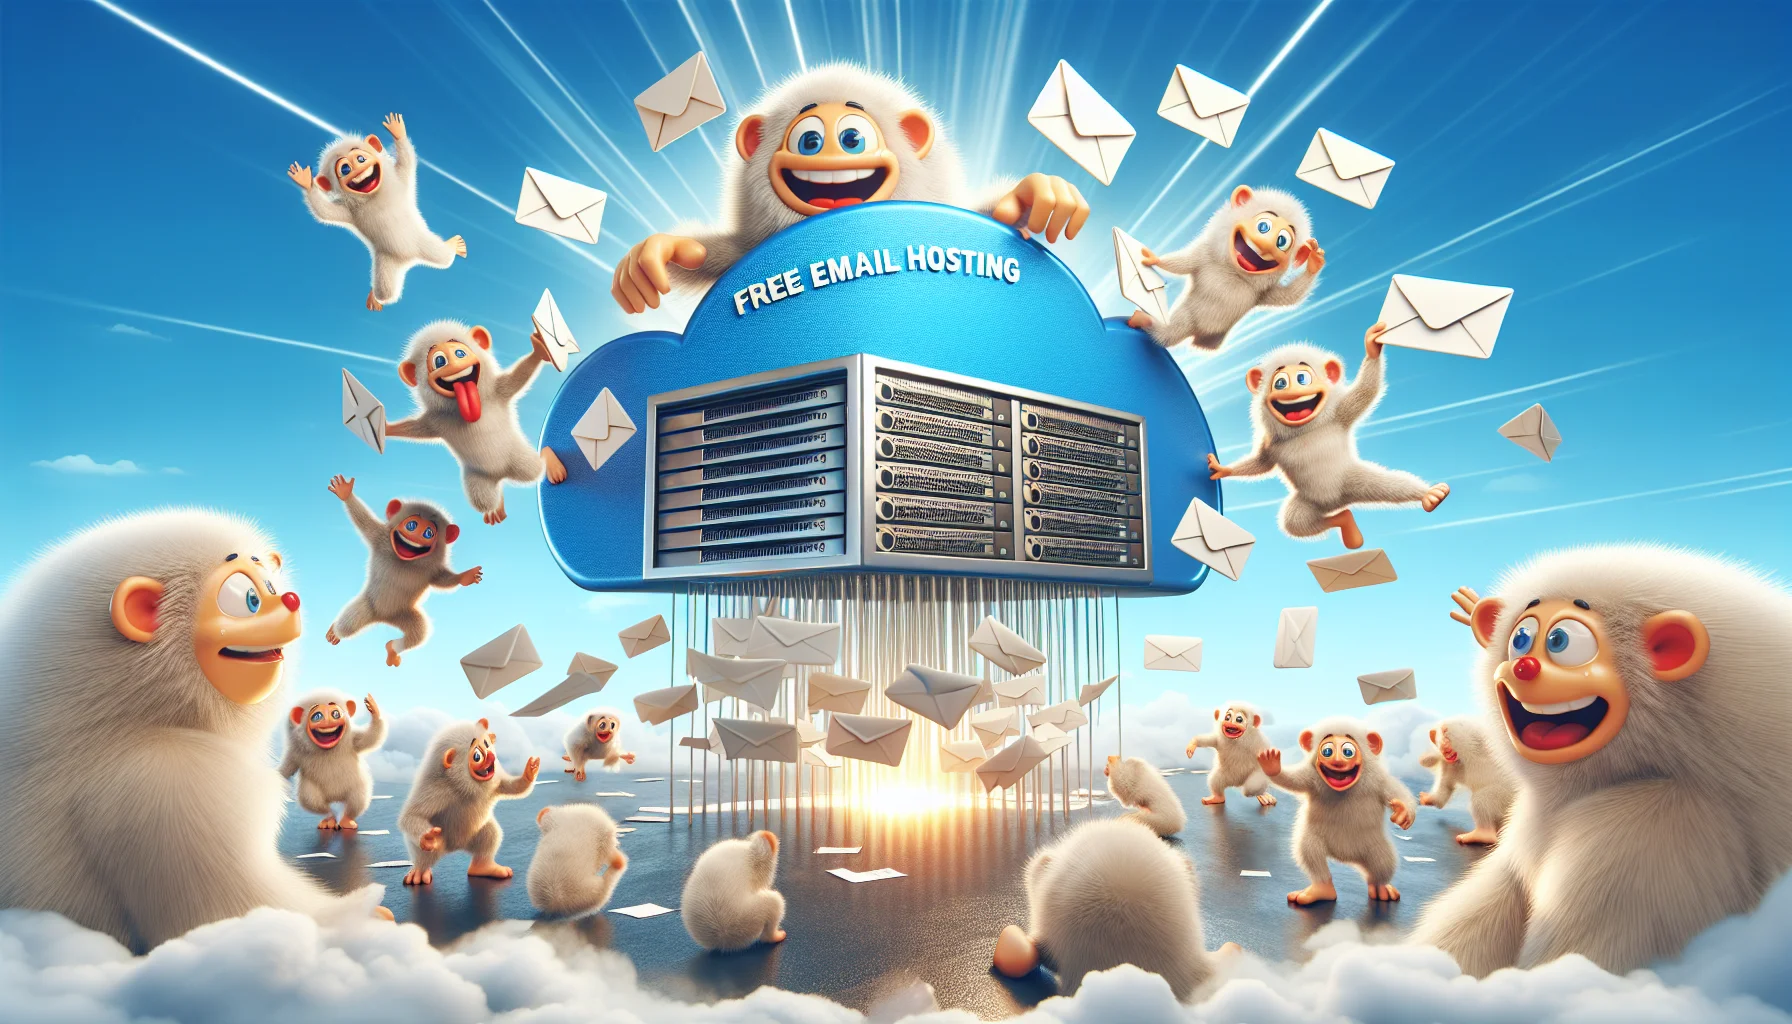 Create a humorous and captivating representation of free email hosting for web hosting. Picture a scene where anthropomorphic email envelopes are joyfully jumping into a gigantic, shiny digital server, happily opening up and showing messages. The scene is happening in a cloud, labeled 'Free Email Hosting', floating high in the sky with rays of sunlight beaming through it. Nearby, web pages represented as furry, friendly creatures are watching this scene with a grin as if they're enticed. The background consists of blue sky and fluffy white clouds.